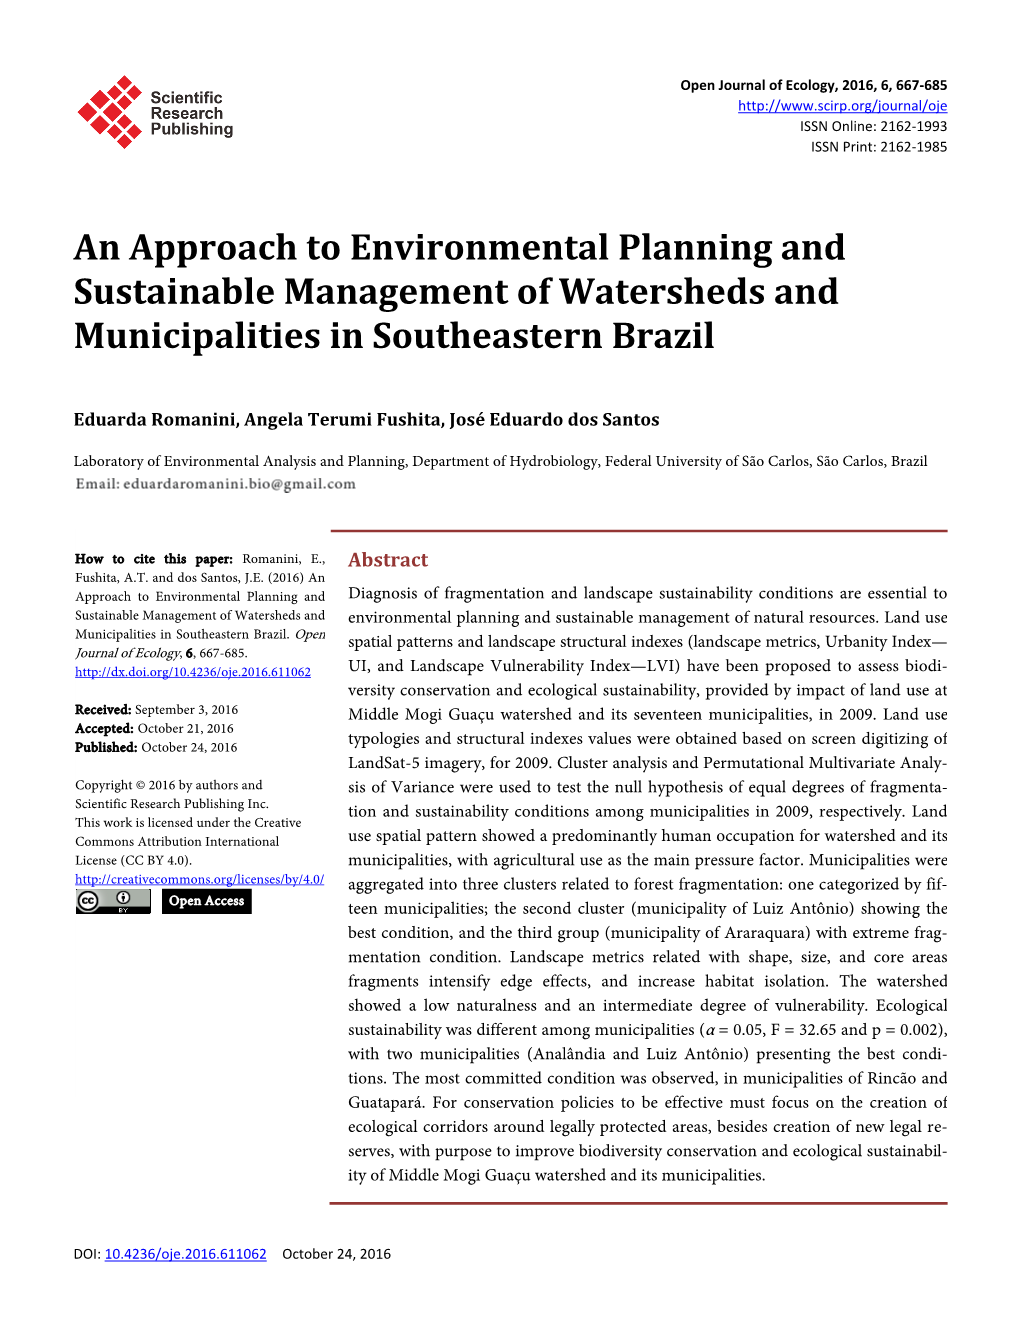 An Approach to Environmental Planning and Sustainable Management of Watersheds and Municipalities in Southeastern Brazil